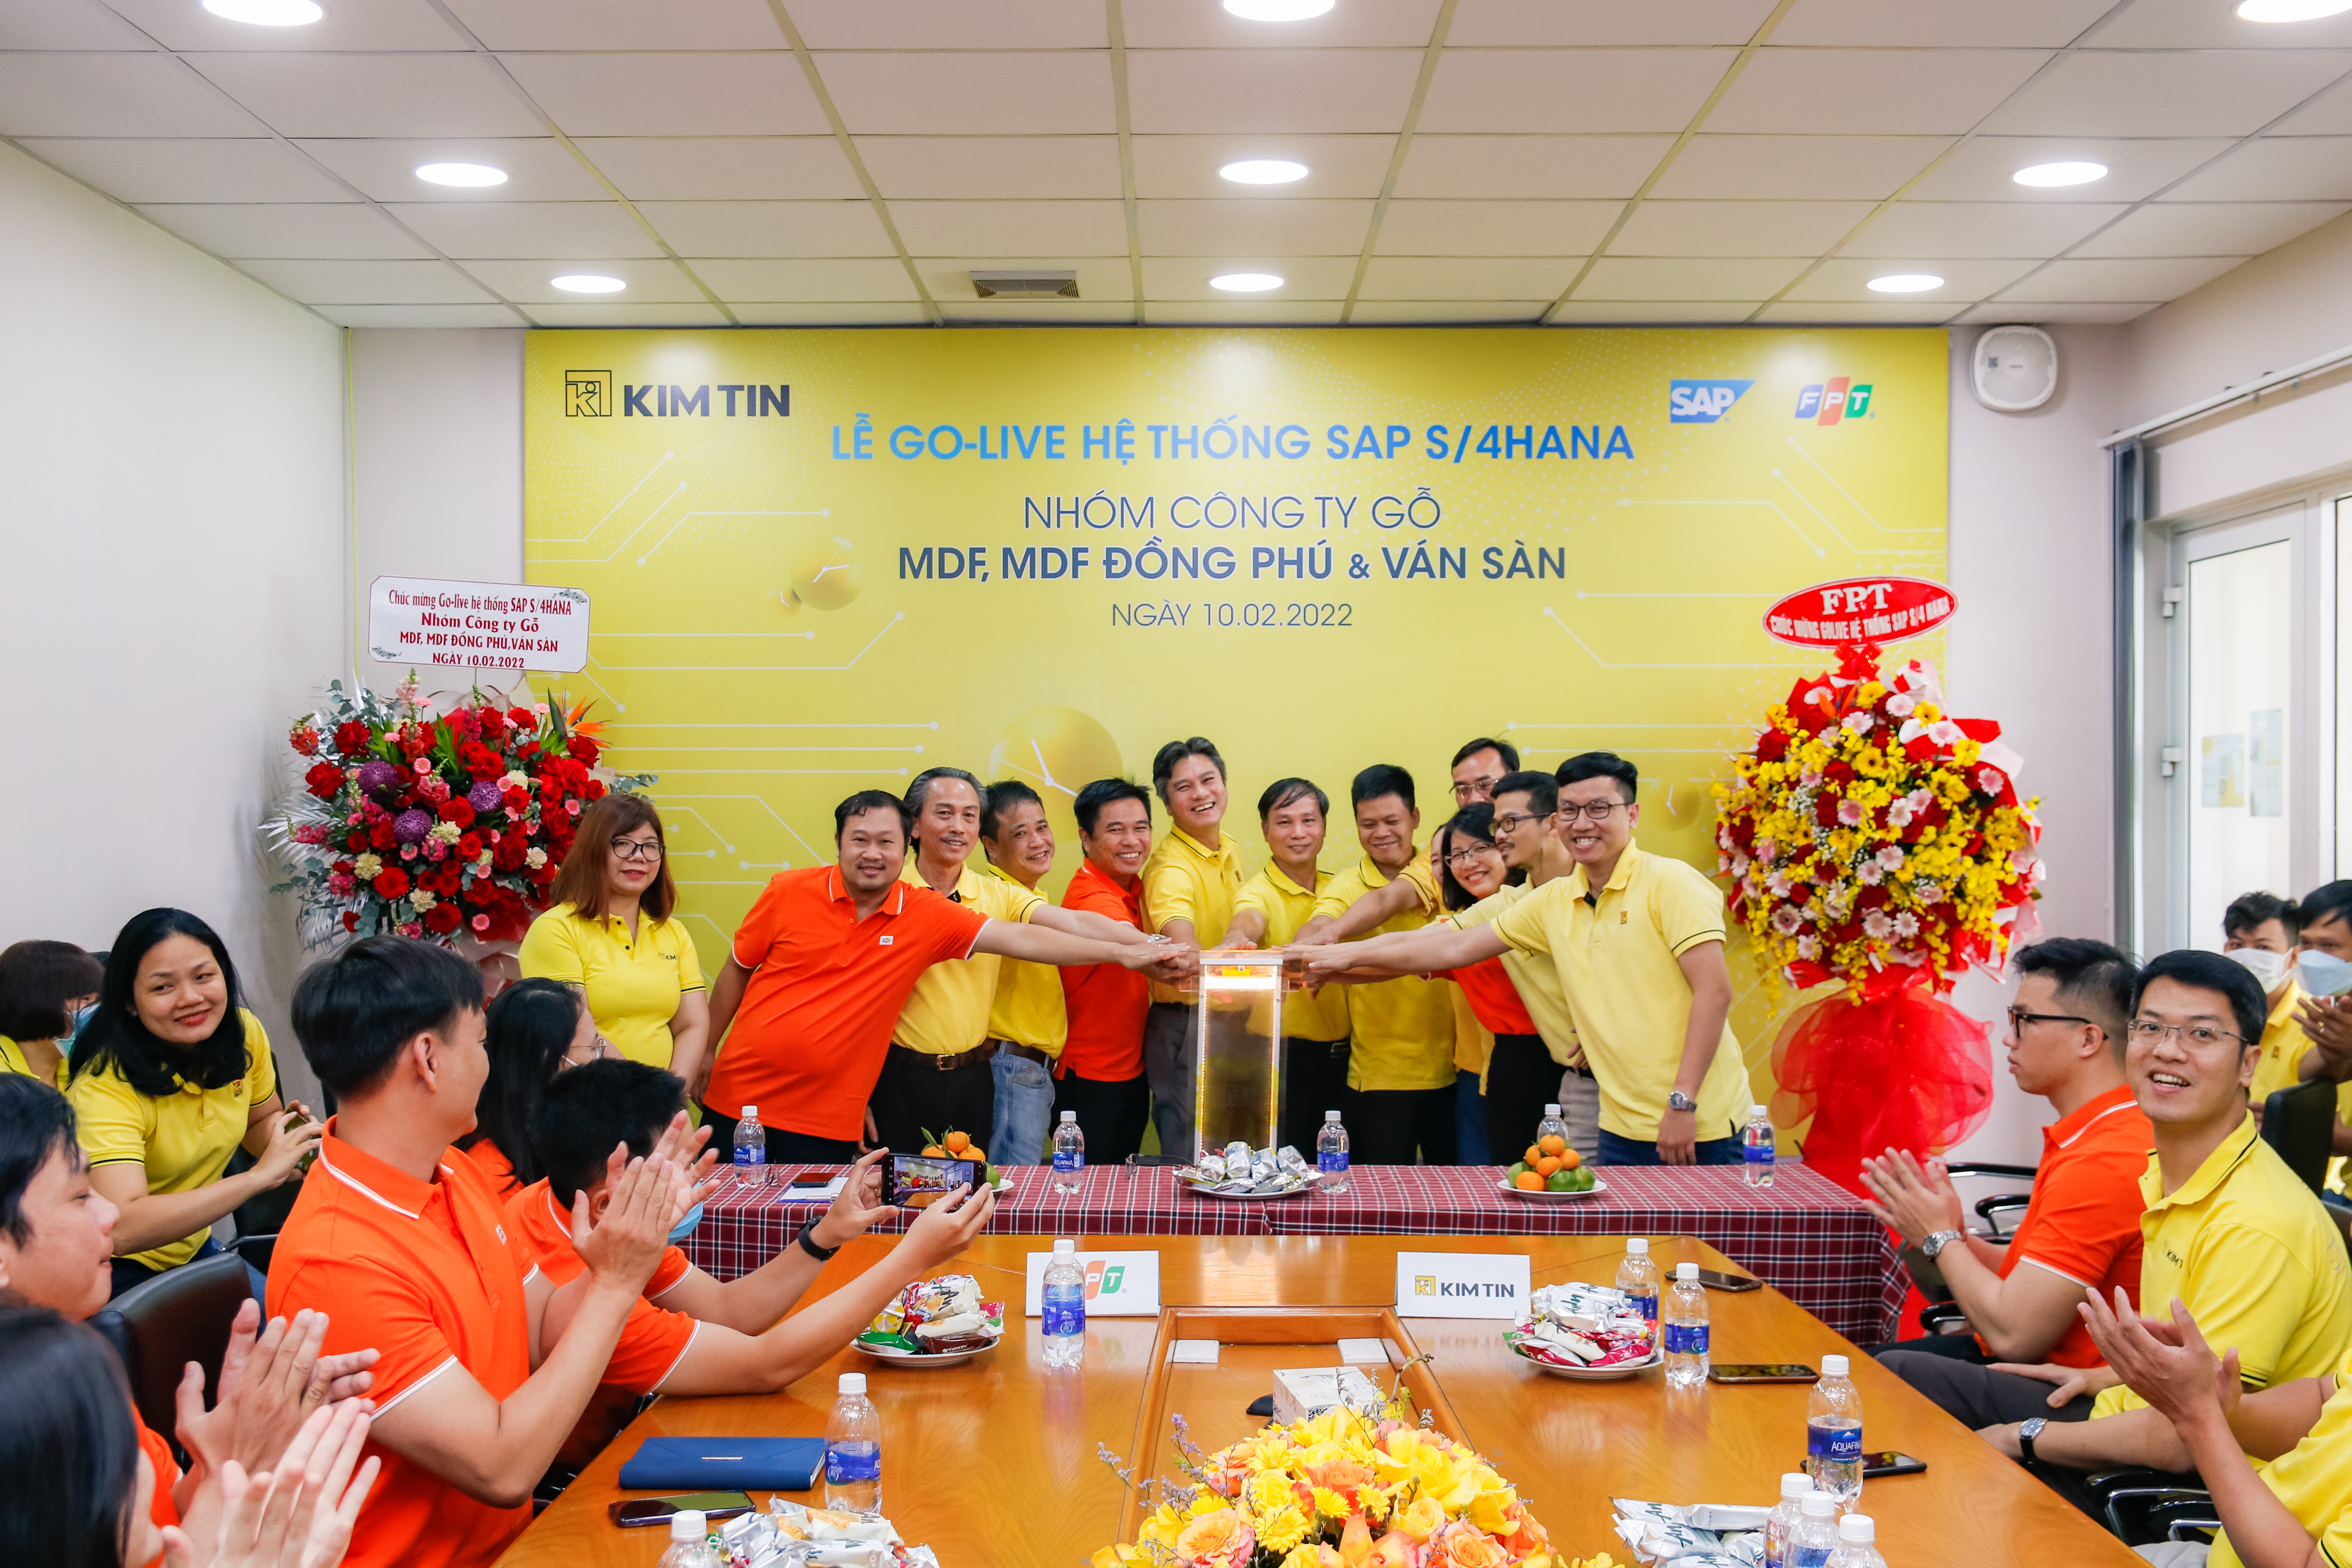 OFFICIALLY LAUCHING THE SAP S/4HANA SYSTEM IN THE KIM TIN GROUP’S WOOD COMPANIES